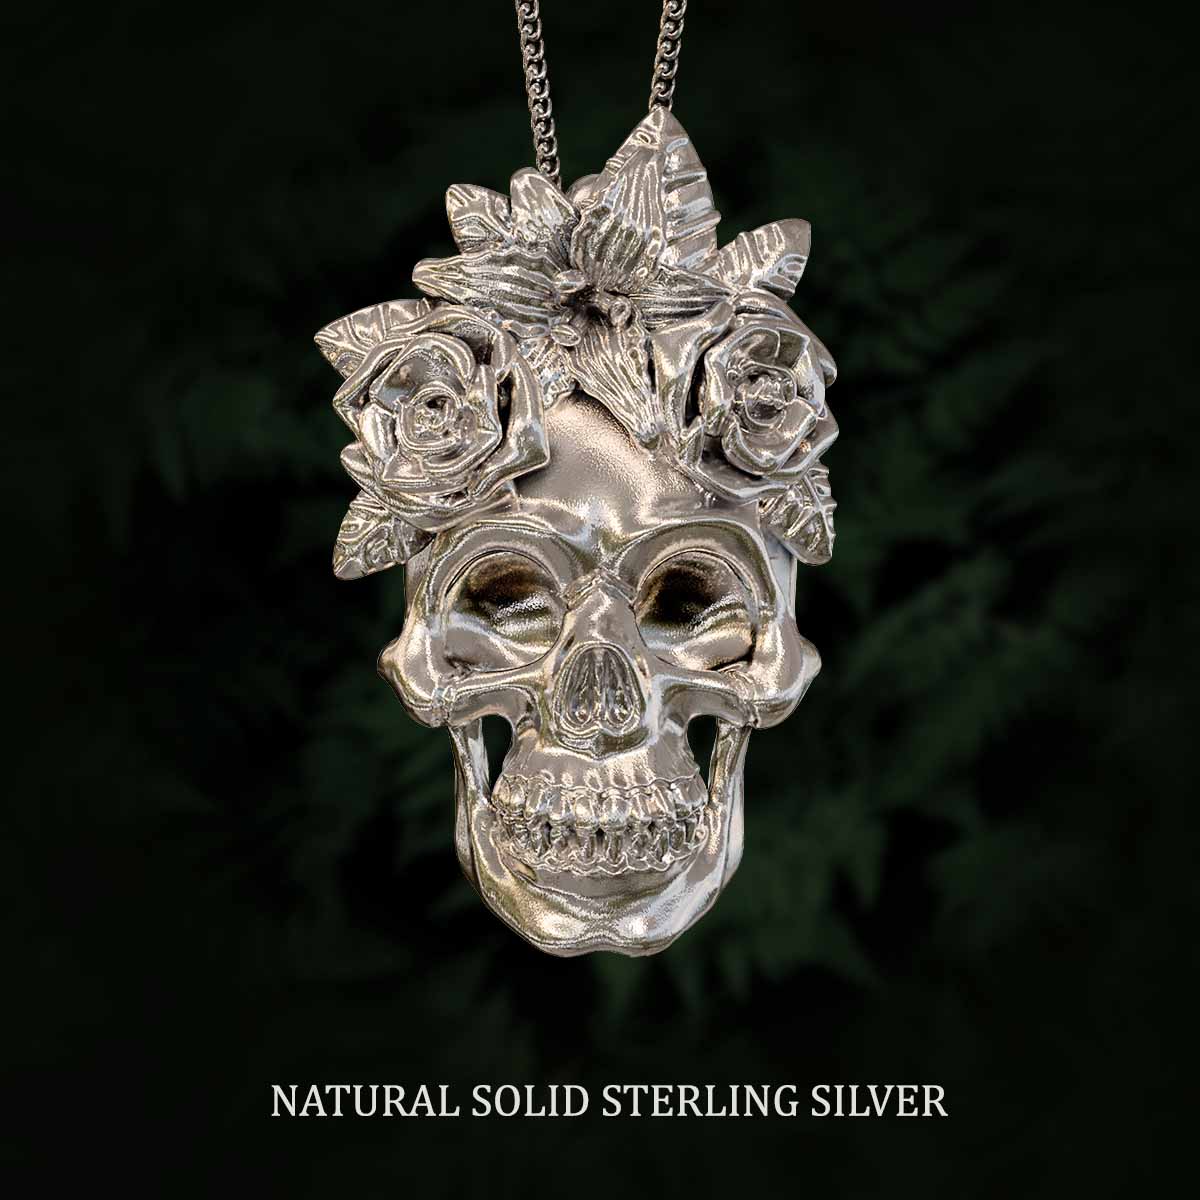     Natural-Satin-Polish-Solid-Sterling-Silver-Human-Skull-and-Flowers-Pendant-Jewelry-For-Necklace